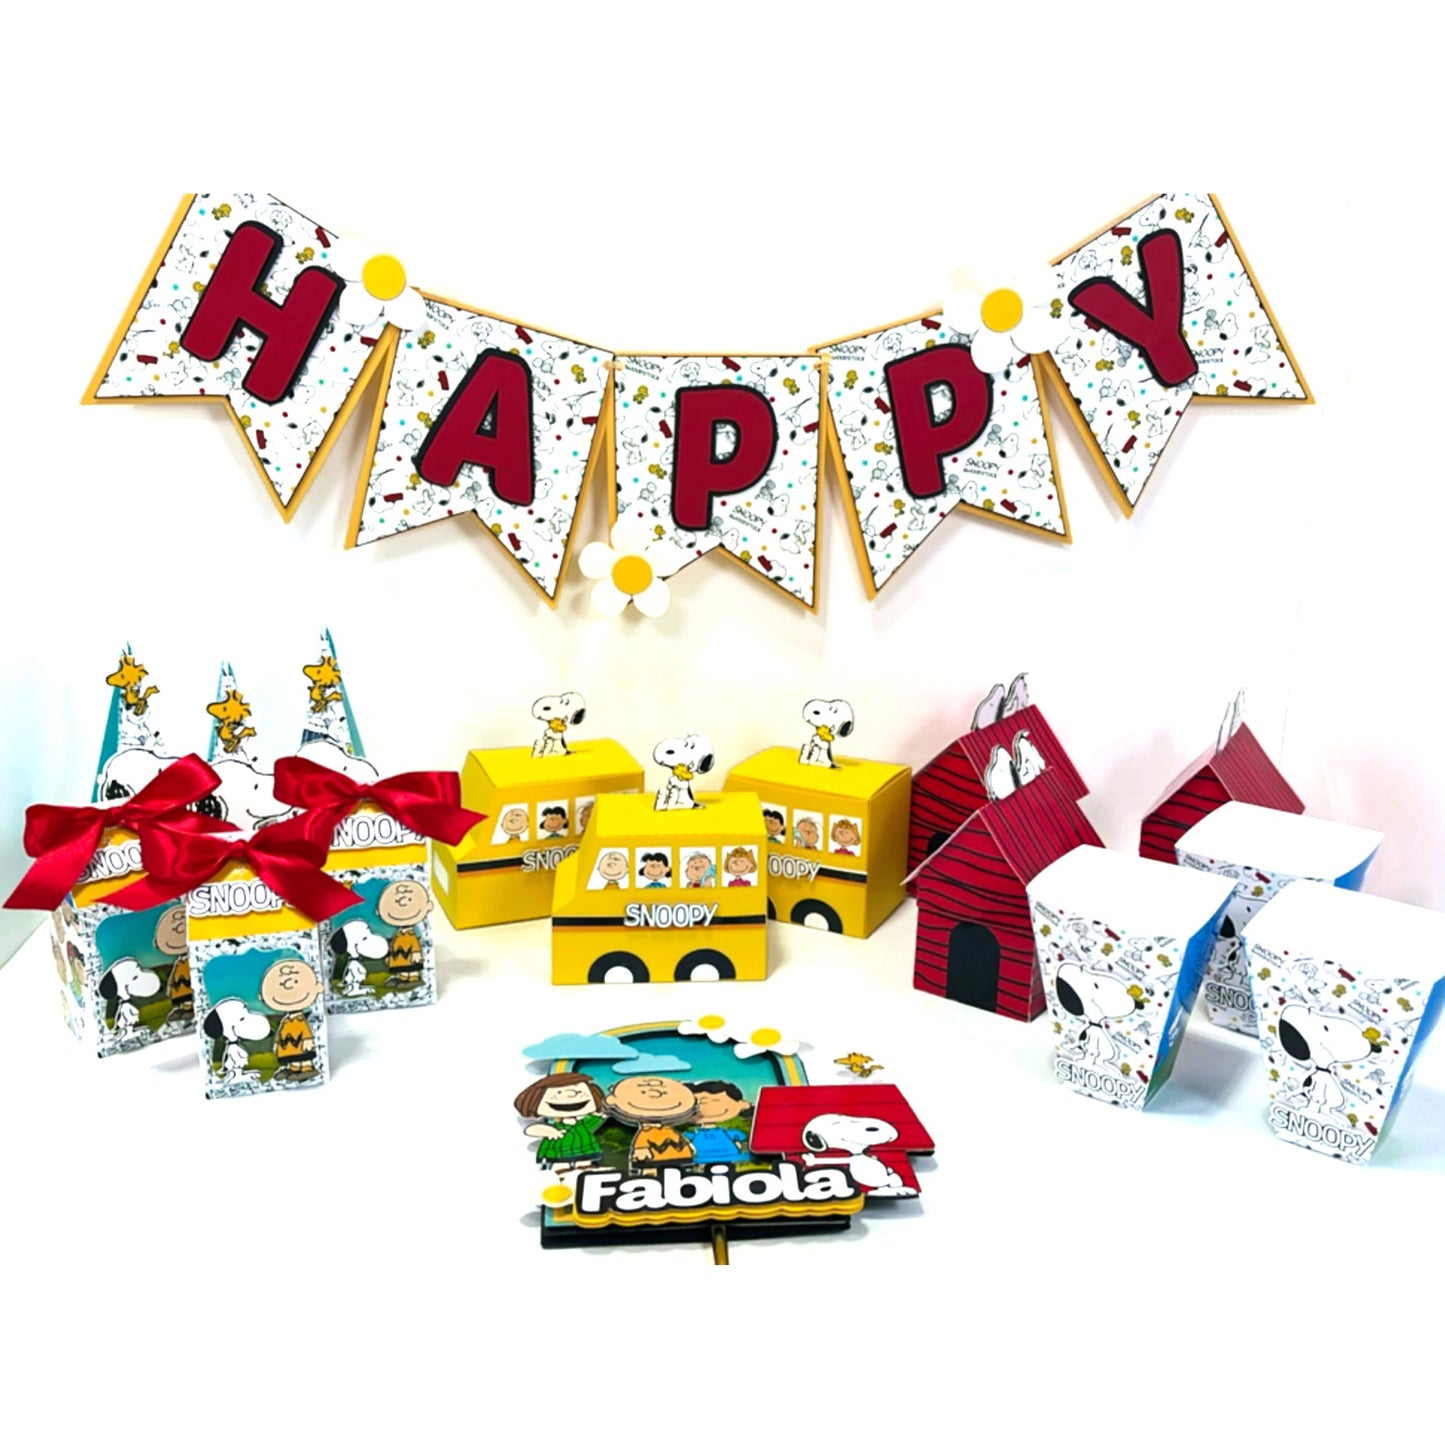 Snoopy Charlie brown peanuts Kit Party decor